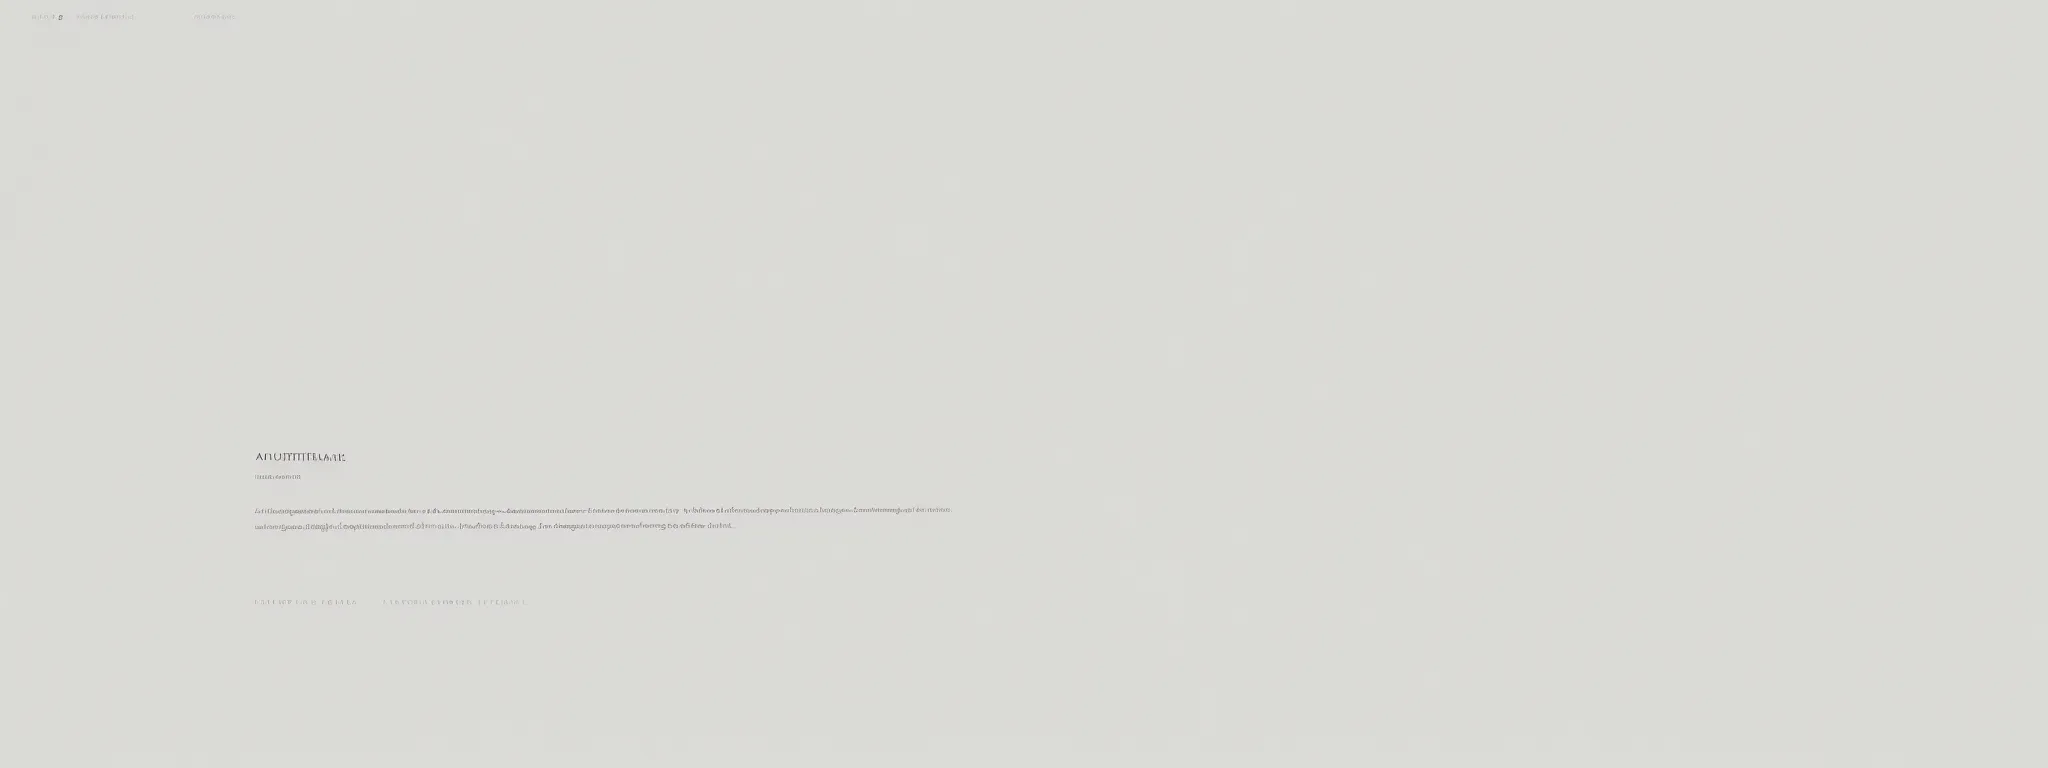 an austere, nearly blank webpage with a single line of text.